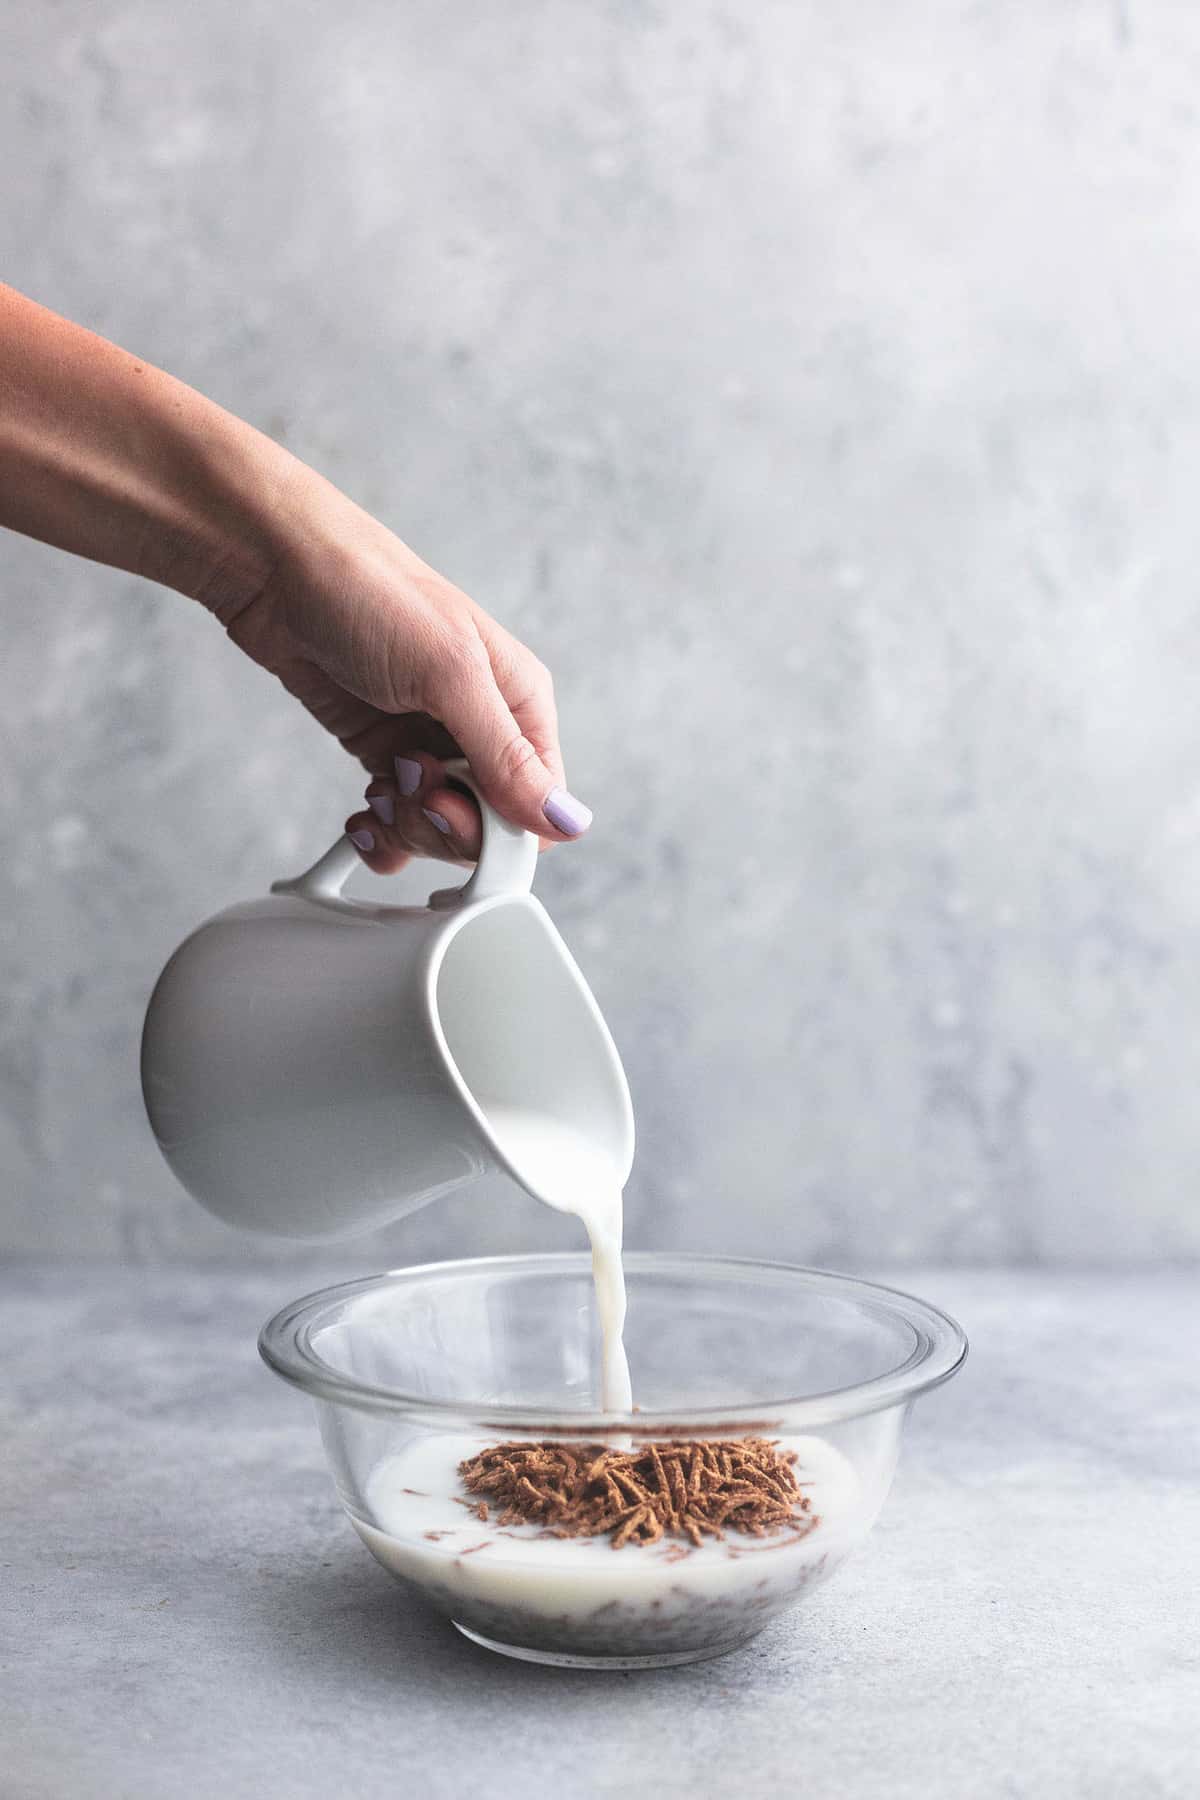 milk being poured from a white pitcher into a bowl of bran cereal in a glass bowl.